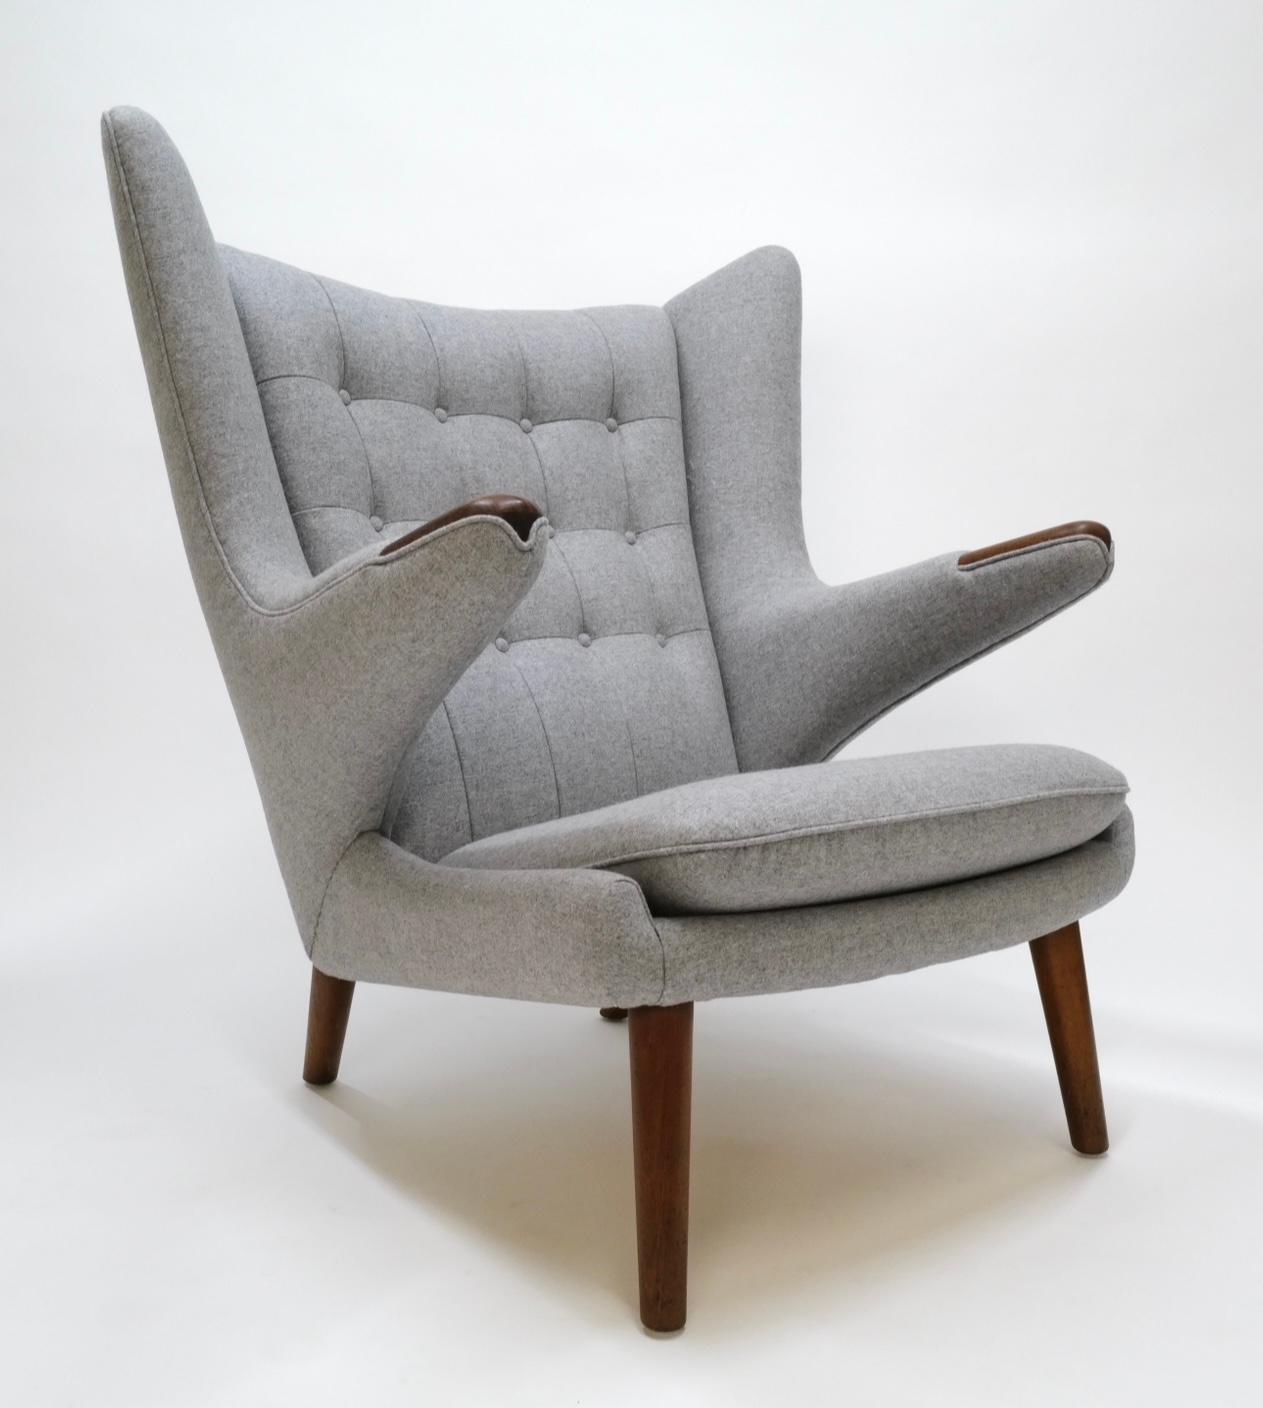 The Papa Bear Chair, a classic design by Hans Wagner, showcases timeless elegance with its iconic mid-century modern silhouette. This particular piece has been meticulously reupholstered by skilled professionals using Kravets heather grey wool